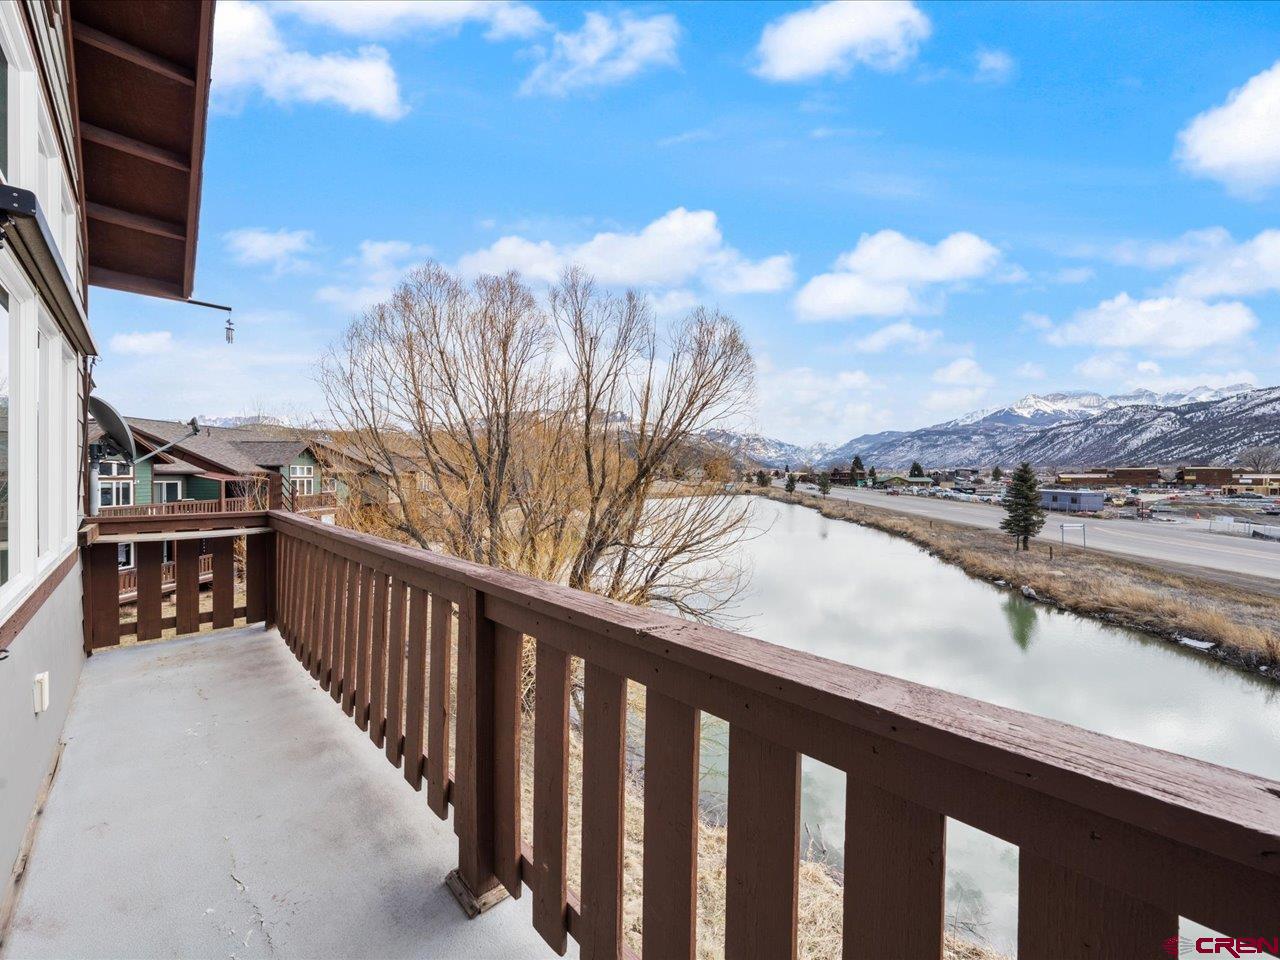 "Million Dollar Views" for far less! Don't miss out on a chance to live in beautiful Ridgway, Colorado with this prime location condo. Plucked first from all of the possible units, because when you see the view, you'll understand why. This well-maintained unit boasts nice appliances, including a brand-new microwave, an open feel with those views, and granite countertops. The carpet was replaced throughout, and the hot water heater is new within the last three years. All the things you want in a condo- gas forced air heat, a stackable washer and dryer in an actual laundry room, and an ideal carport spot and outdoor storage space included to keep some snow off your vehicle and your outdoor gear protected. This unit hasn't been available since it was built. Owner carry option available with 100K downpayment.